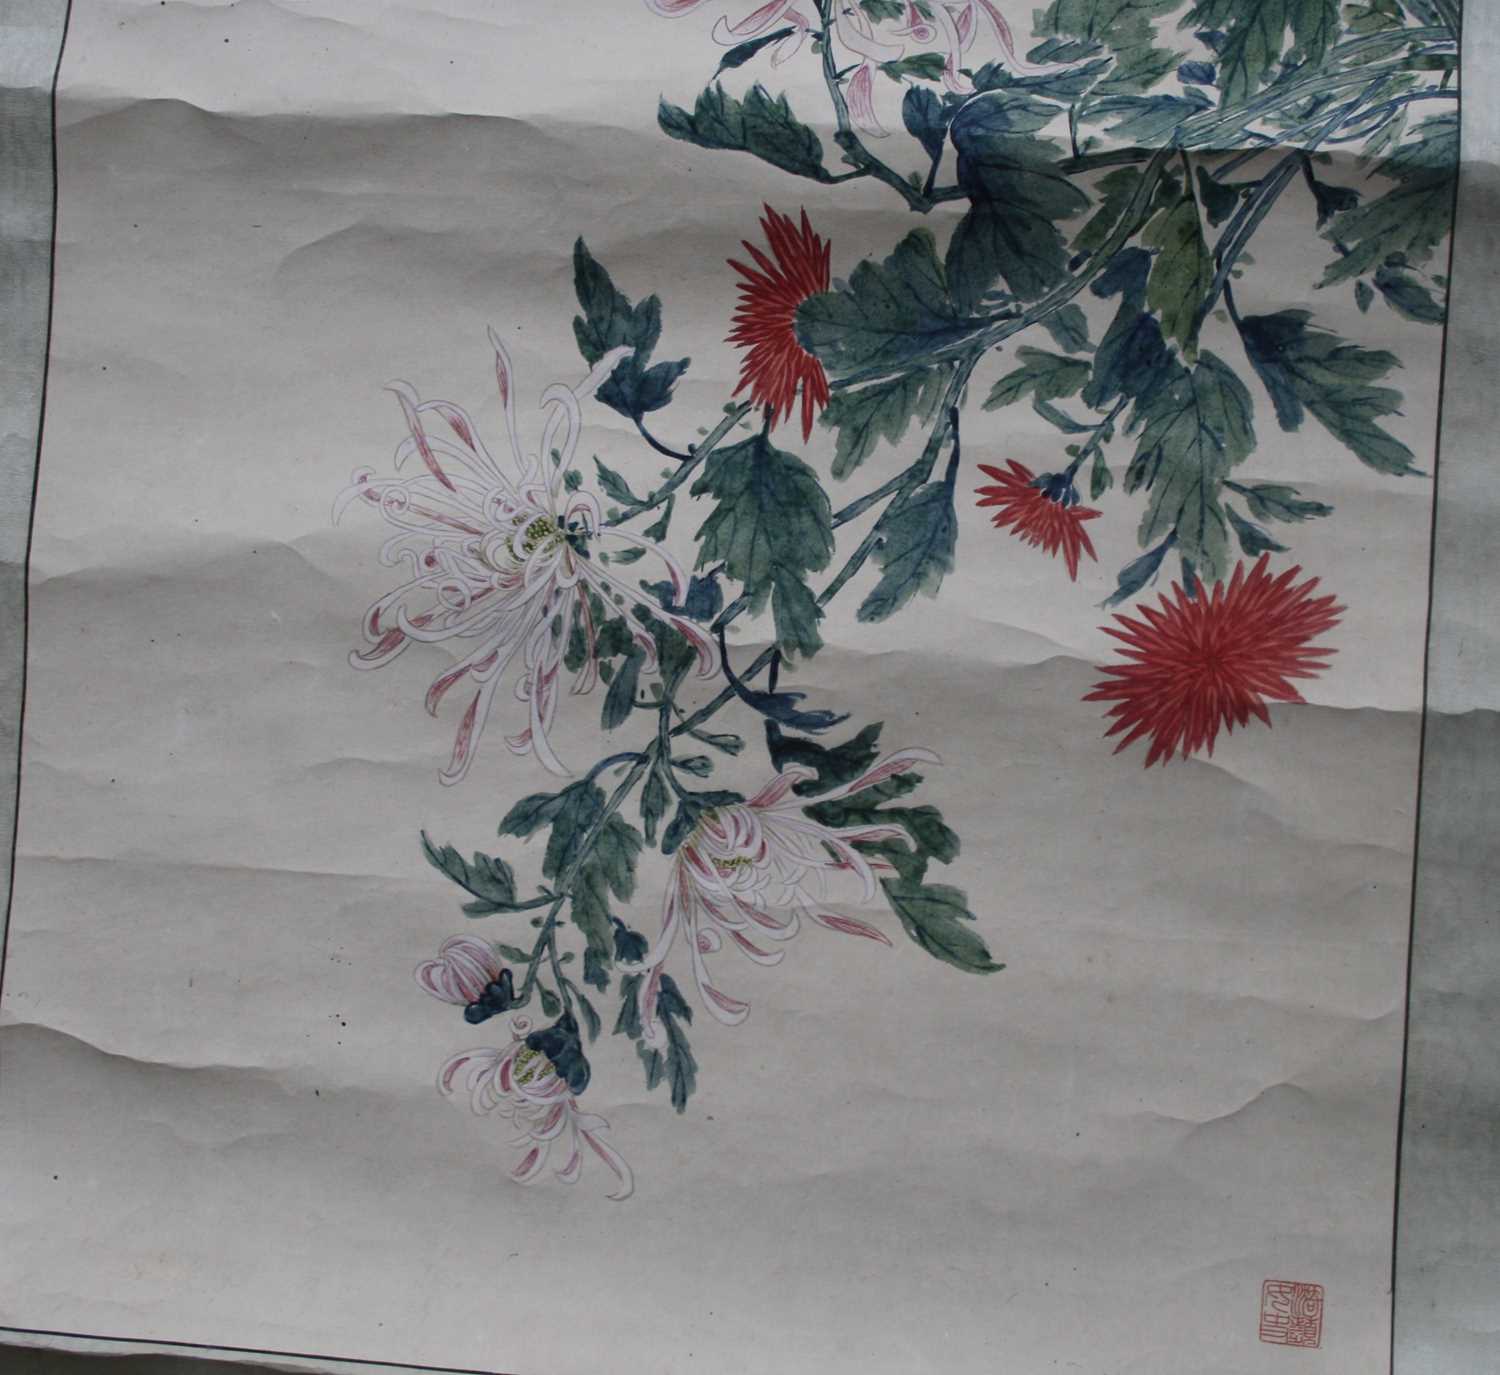 Yuan Yunyi (袁韻宜) (1920-2004) - Chrysanthemums, Republic of China scroll painting dated 1944, ink - Image 5 of 31